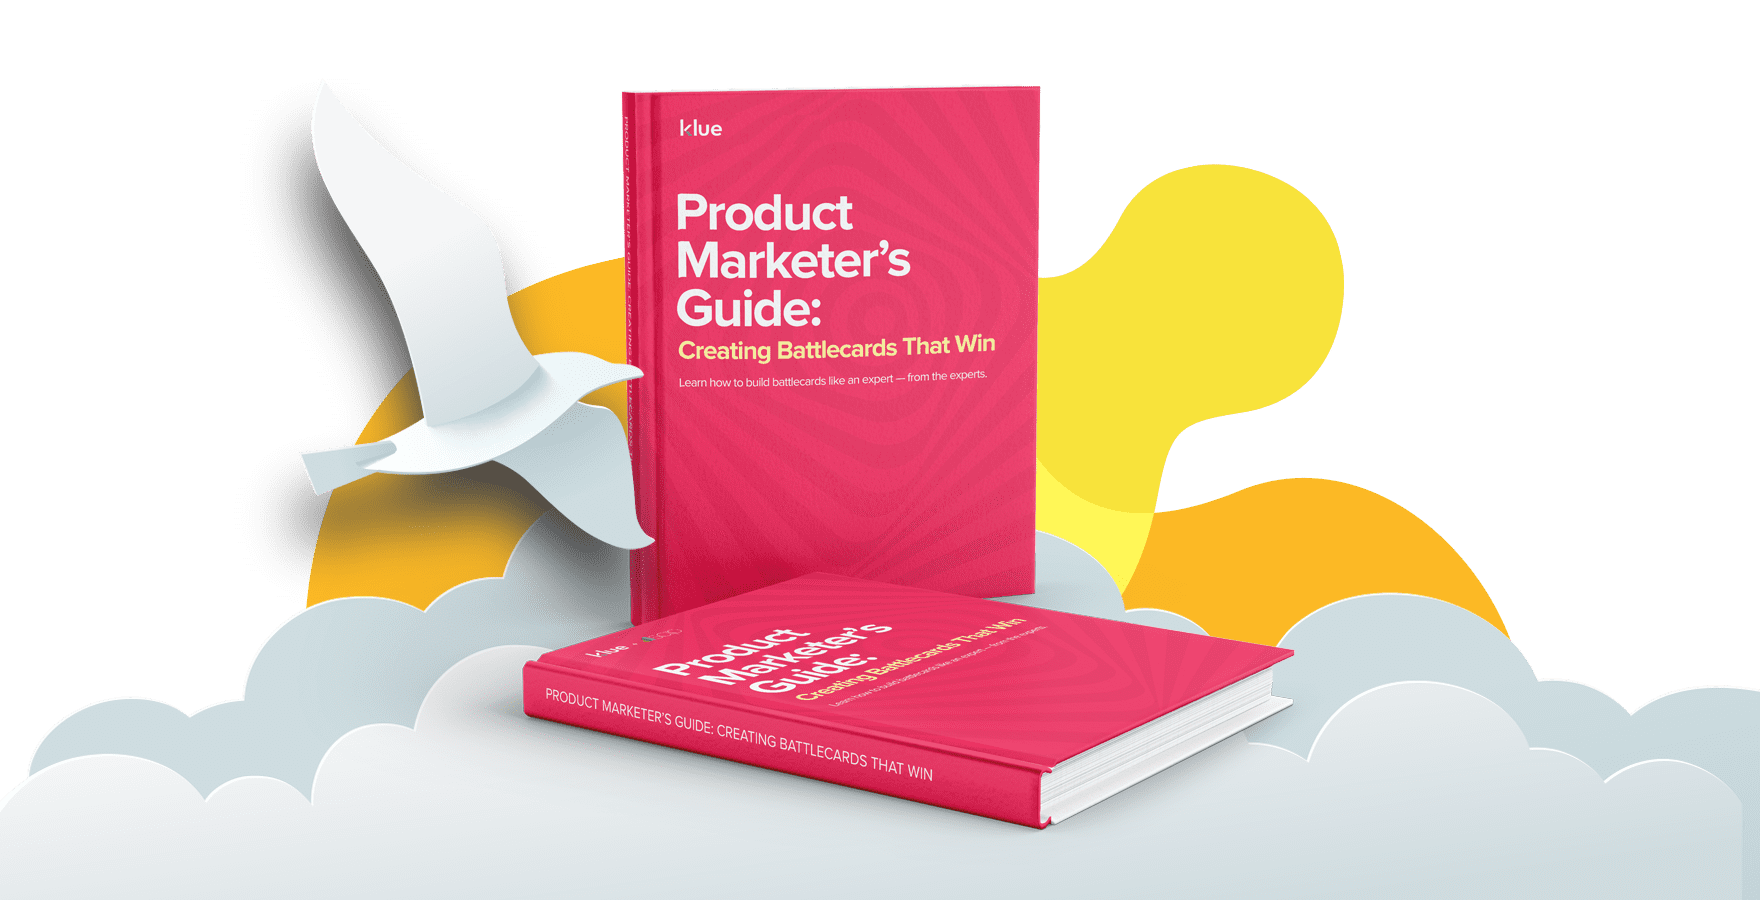 Guide-product-marketers-guide-creating-battlecards